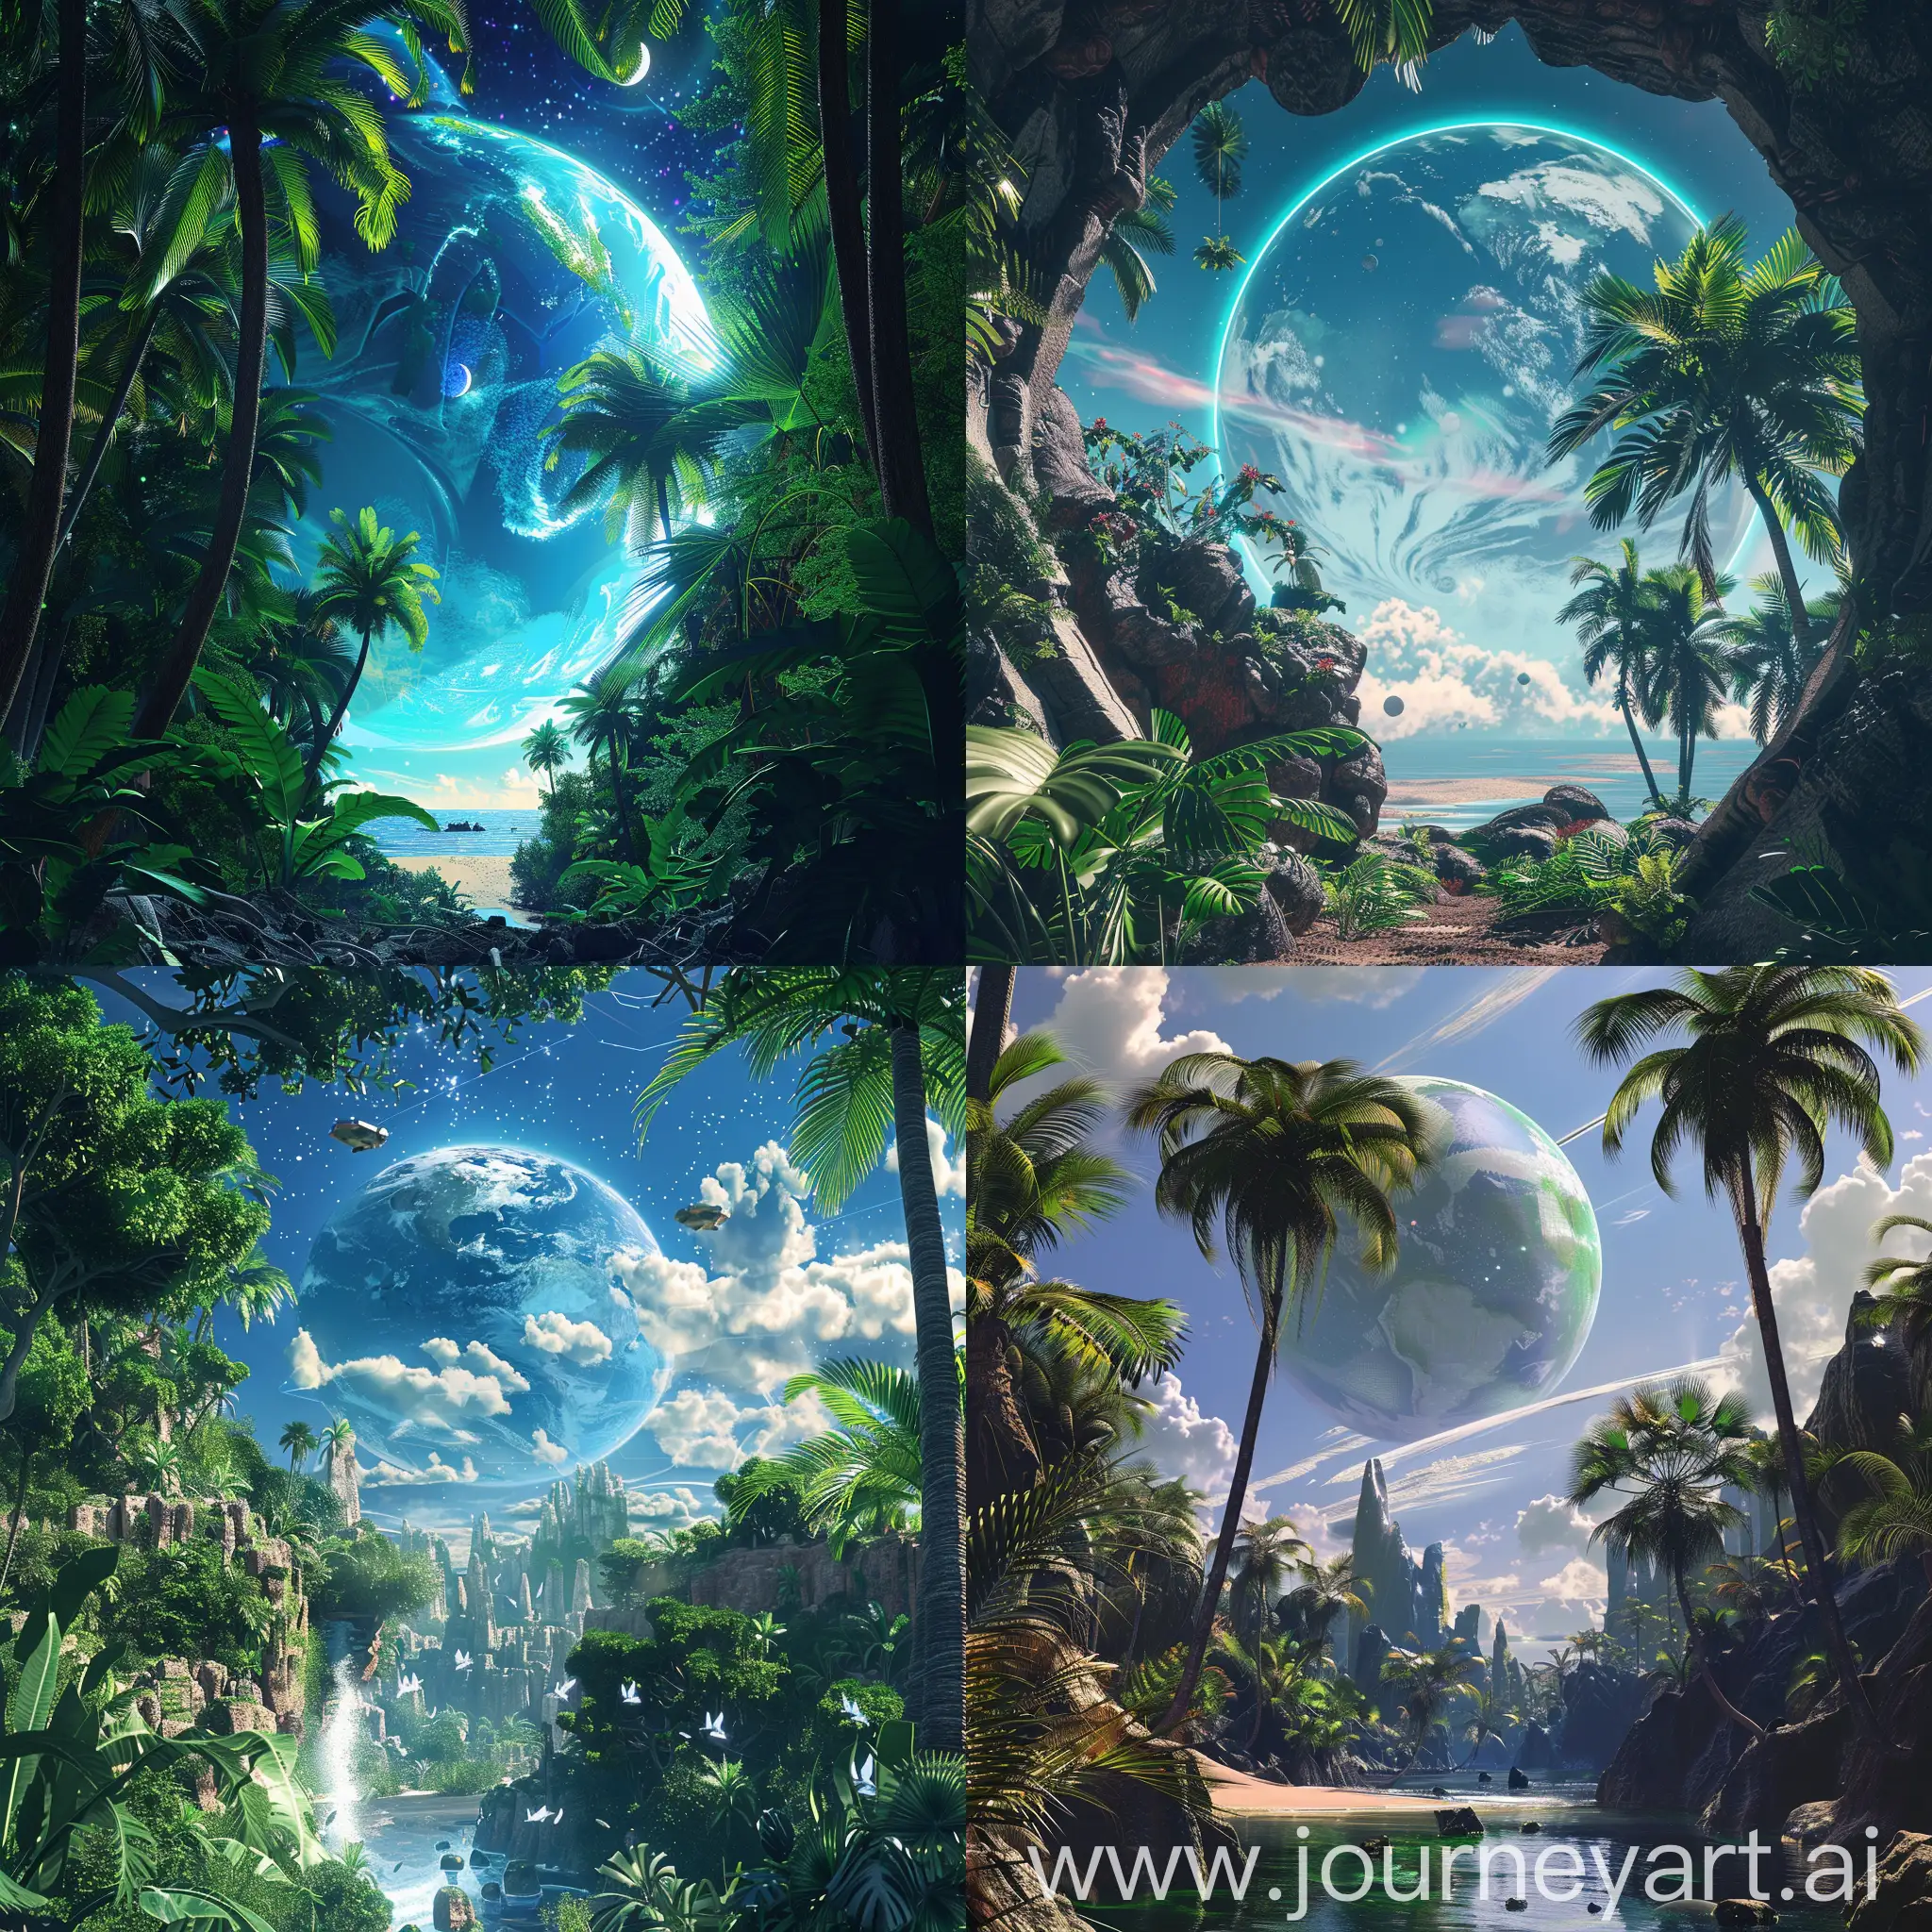 tropical paradise at uran whith sky view of planeth earth in cyberpunk style